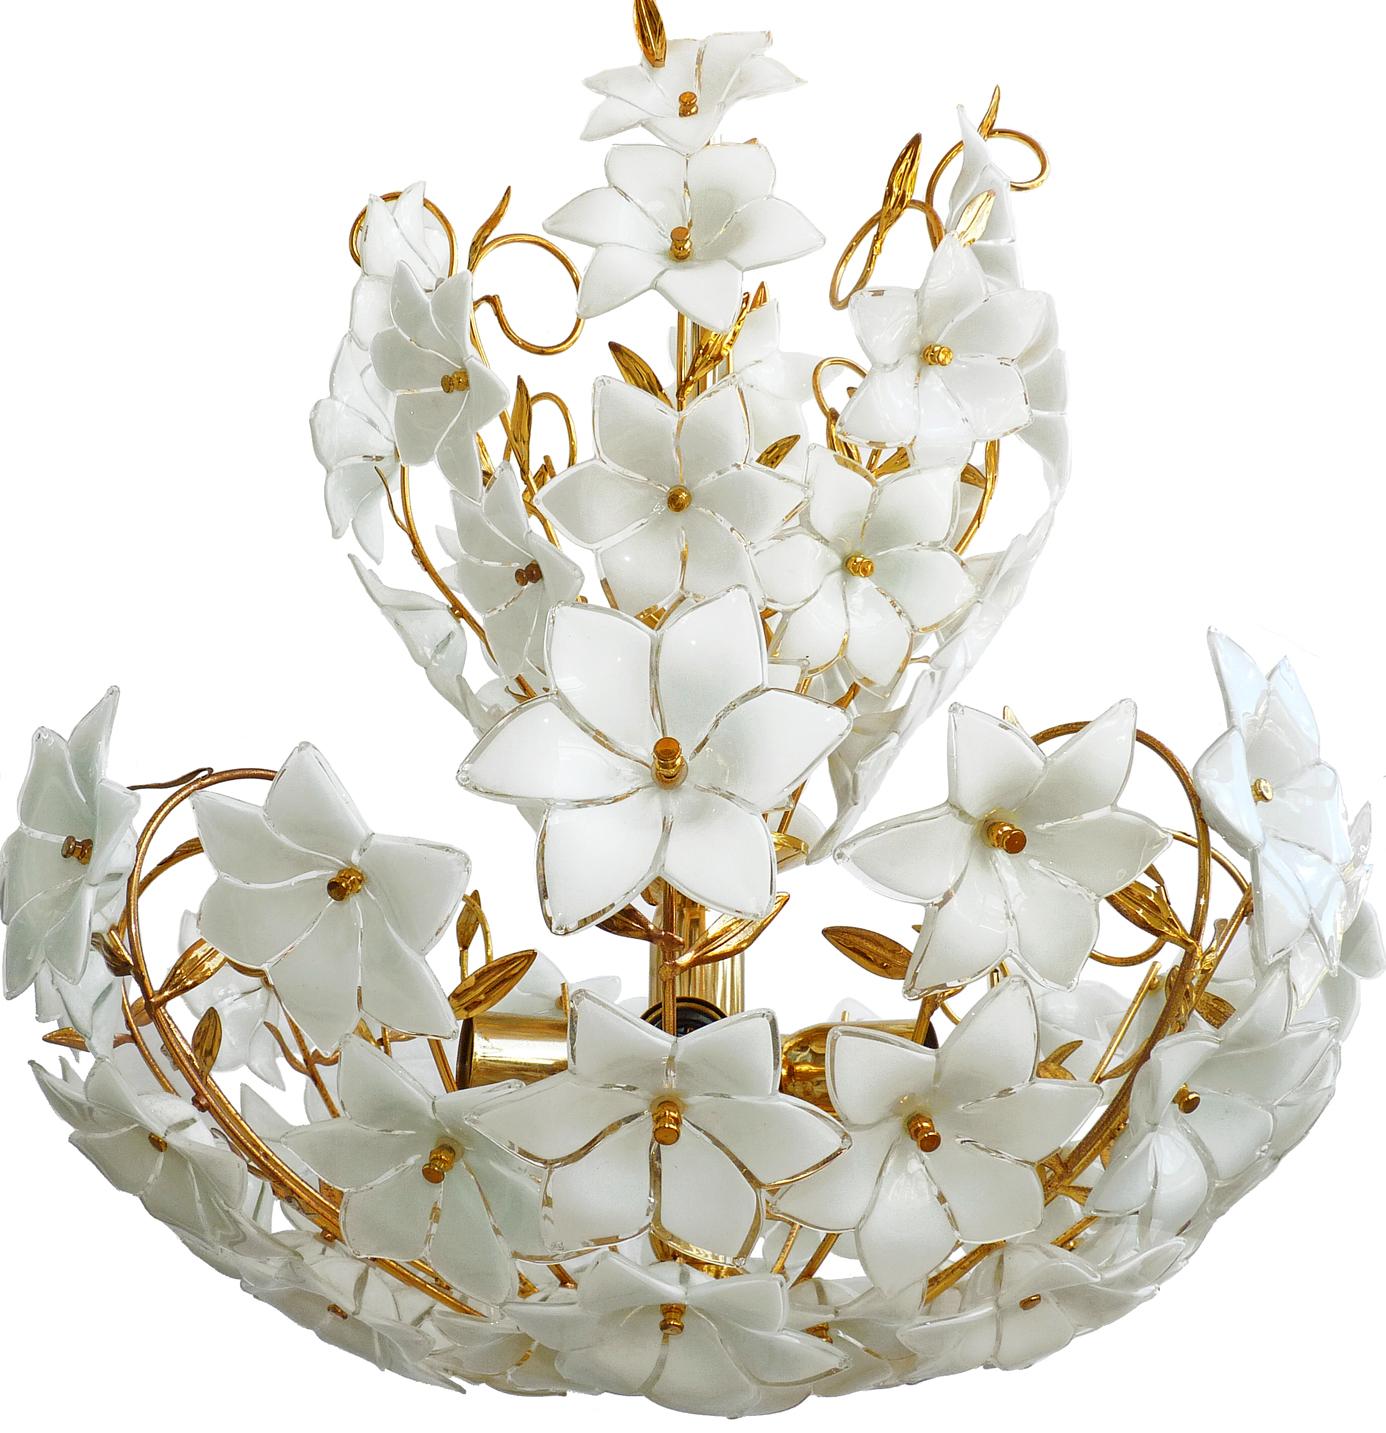 Large 1990s vintage midcentury Italian Murano flower bouquet attributed to Venini. Art-glass with 72 hand blown white and clear glass flowers and gold-plated brass. A few missing leaves.
Measures:
Diameter 24 in/ 60 cm
Height 36 in (chain=3.5